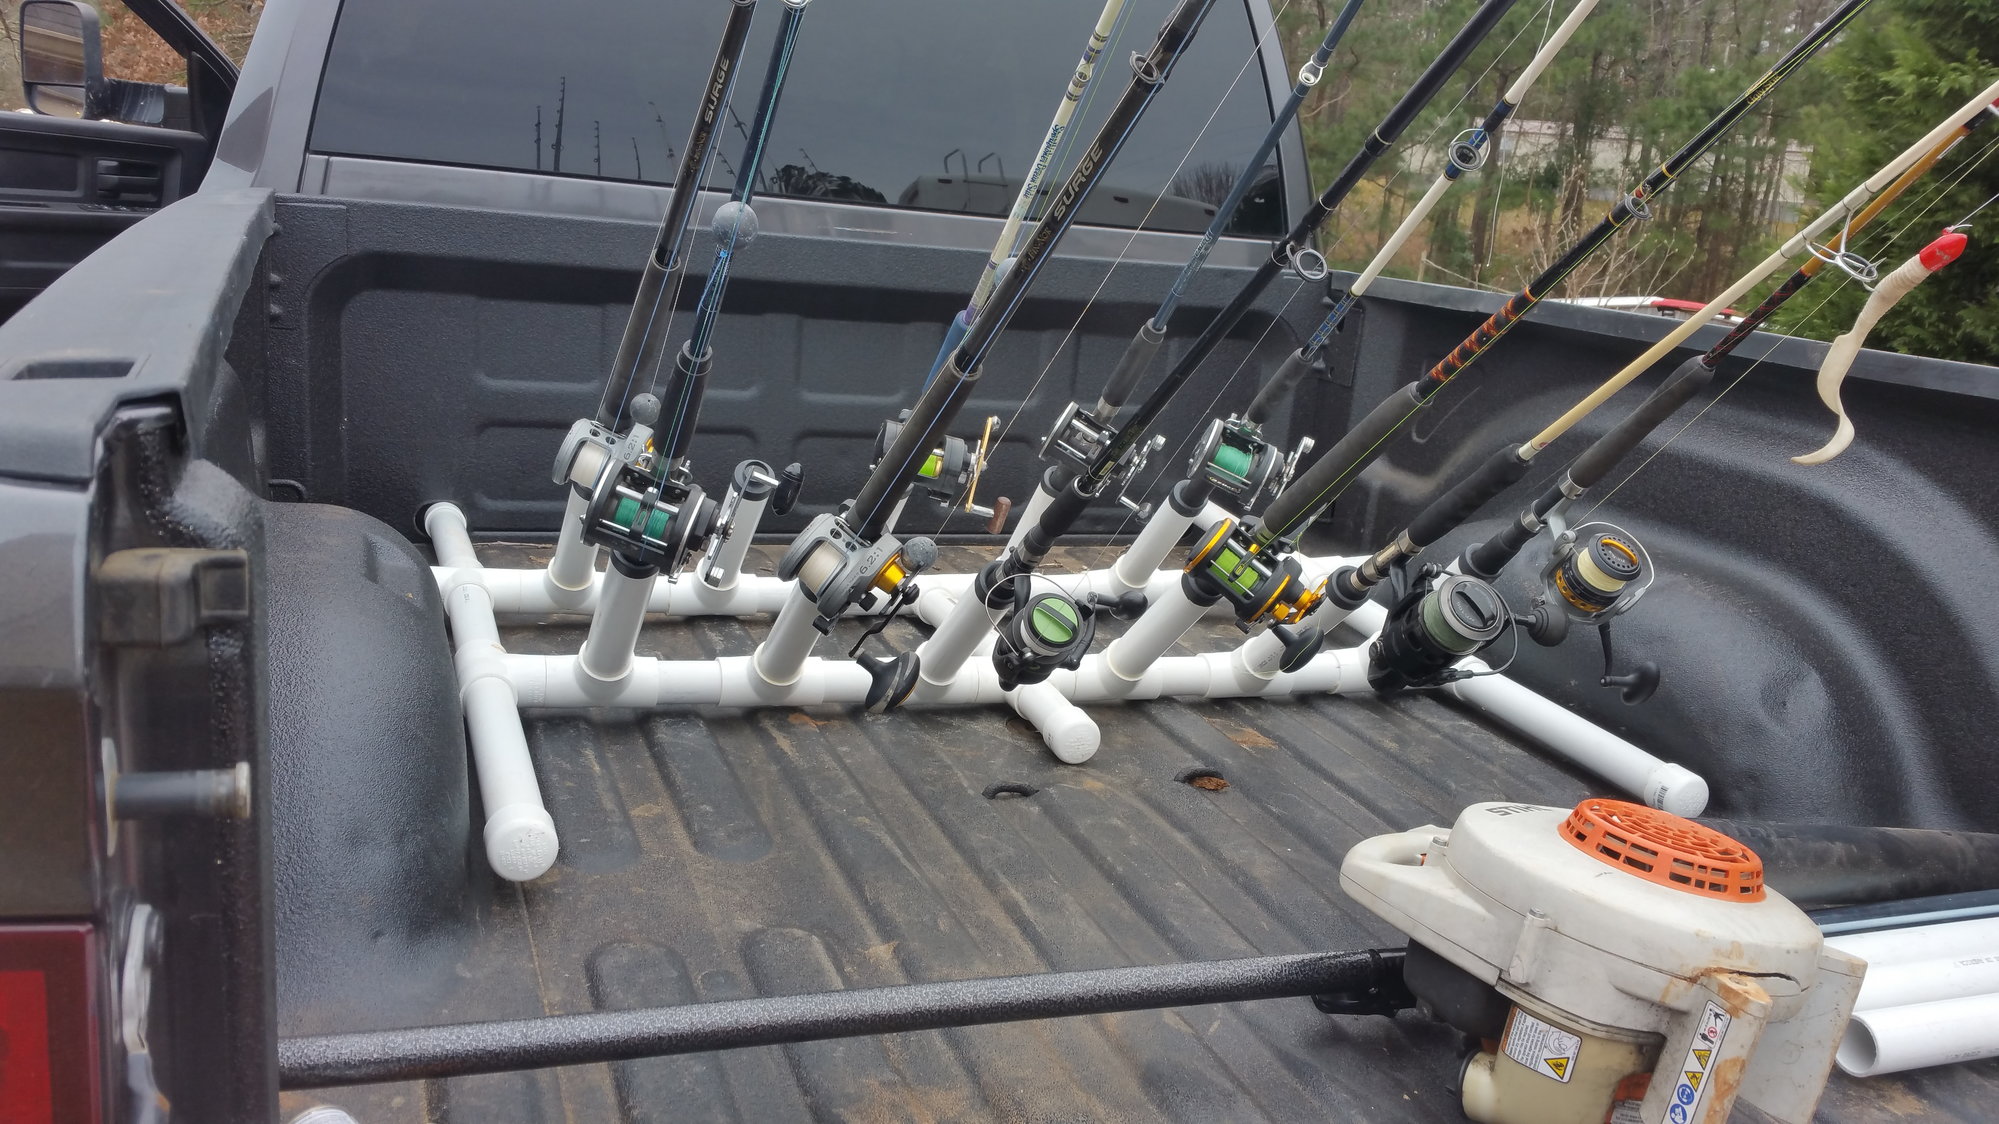 rod holder track - The Hull Truth - Boating and Fishing Forum